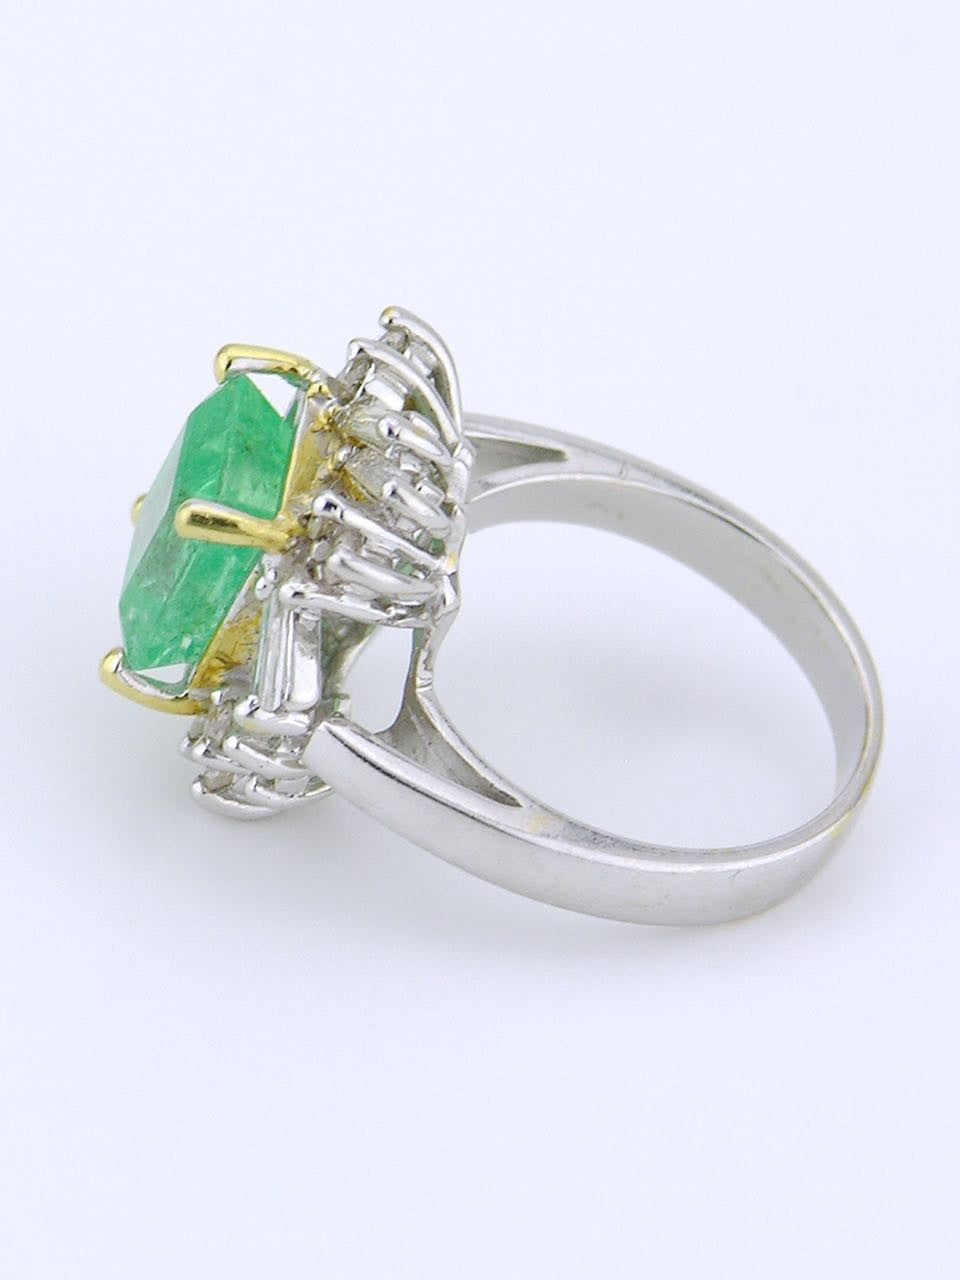 White gold emerald and diamond cluster ring